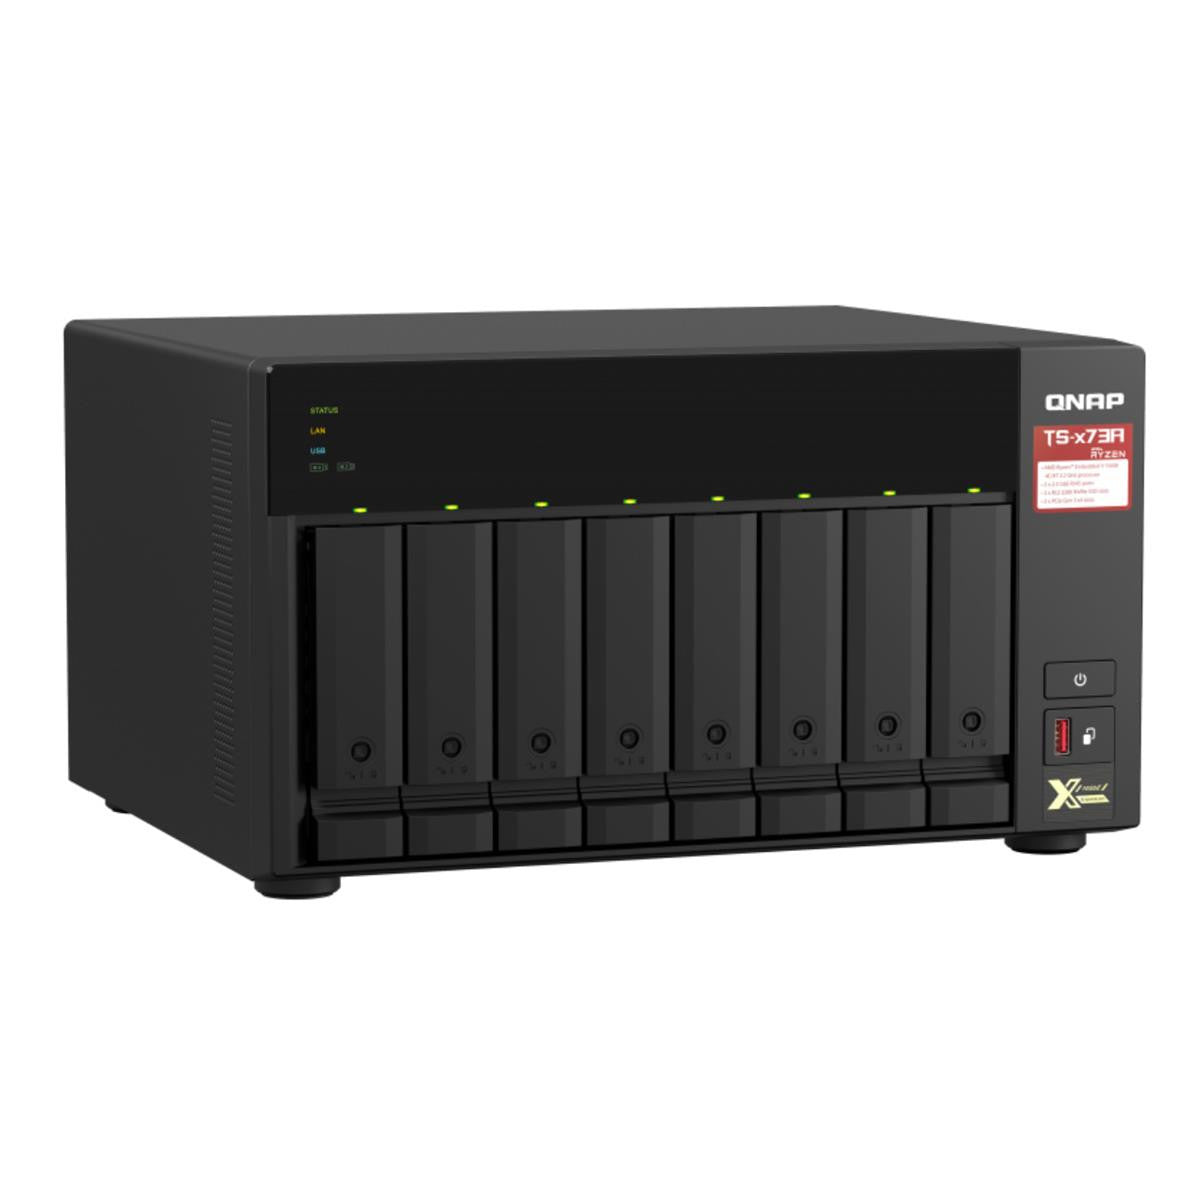 QNAP TS-873A 8-BAY NAS with 8GB DDR4 RAM and 96TB (8x12TB) Western Digital RED PLUS Drives Fully Assembled and Tested